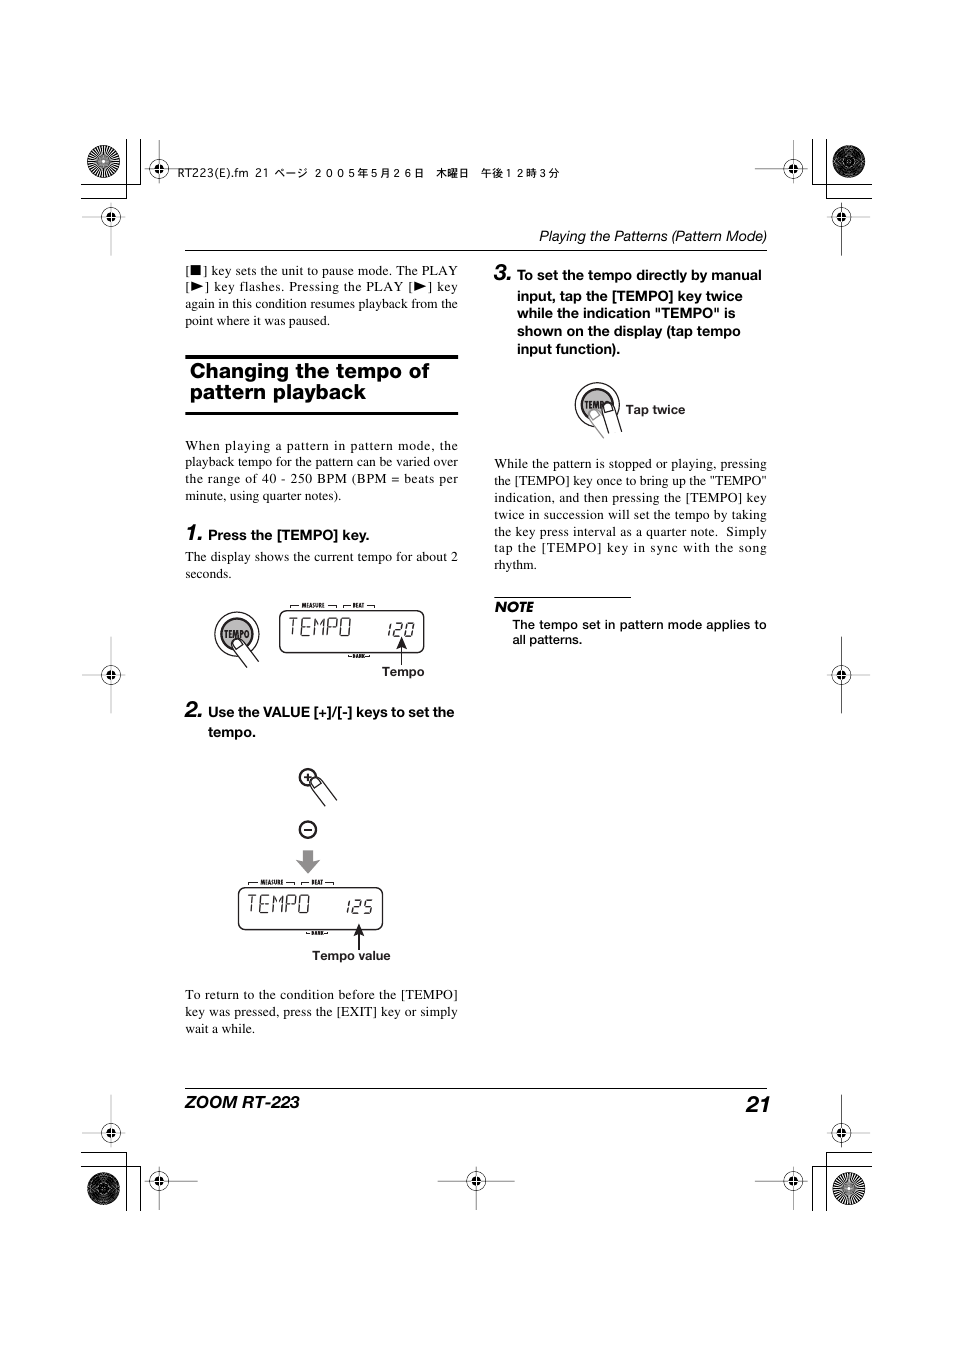 Changing the tempo of pattern playback, Tempo | Zoom RT-223 User Manual